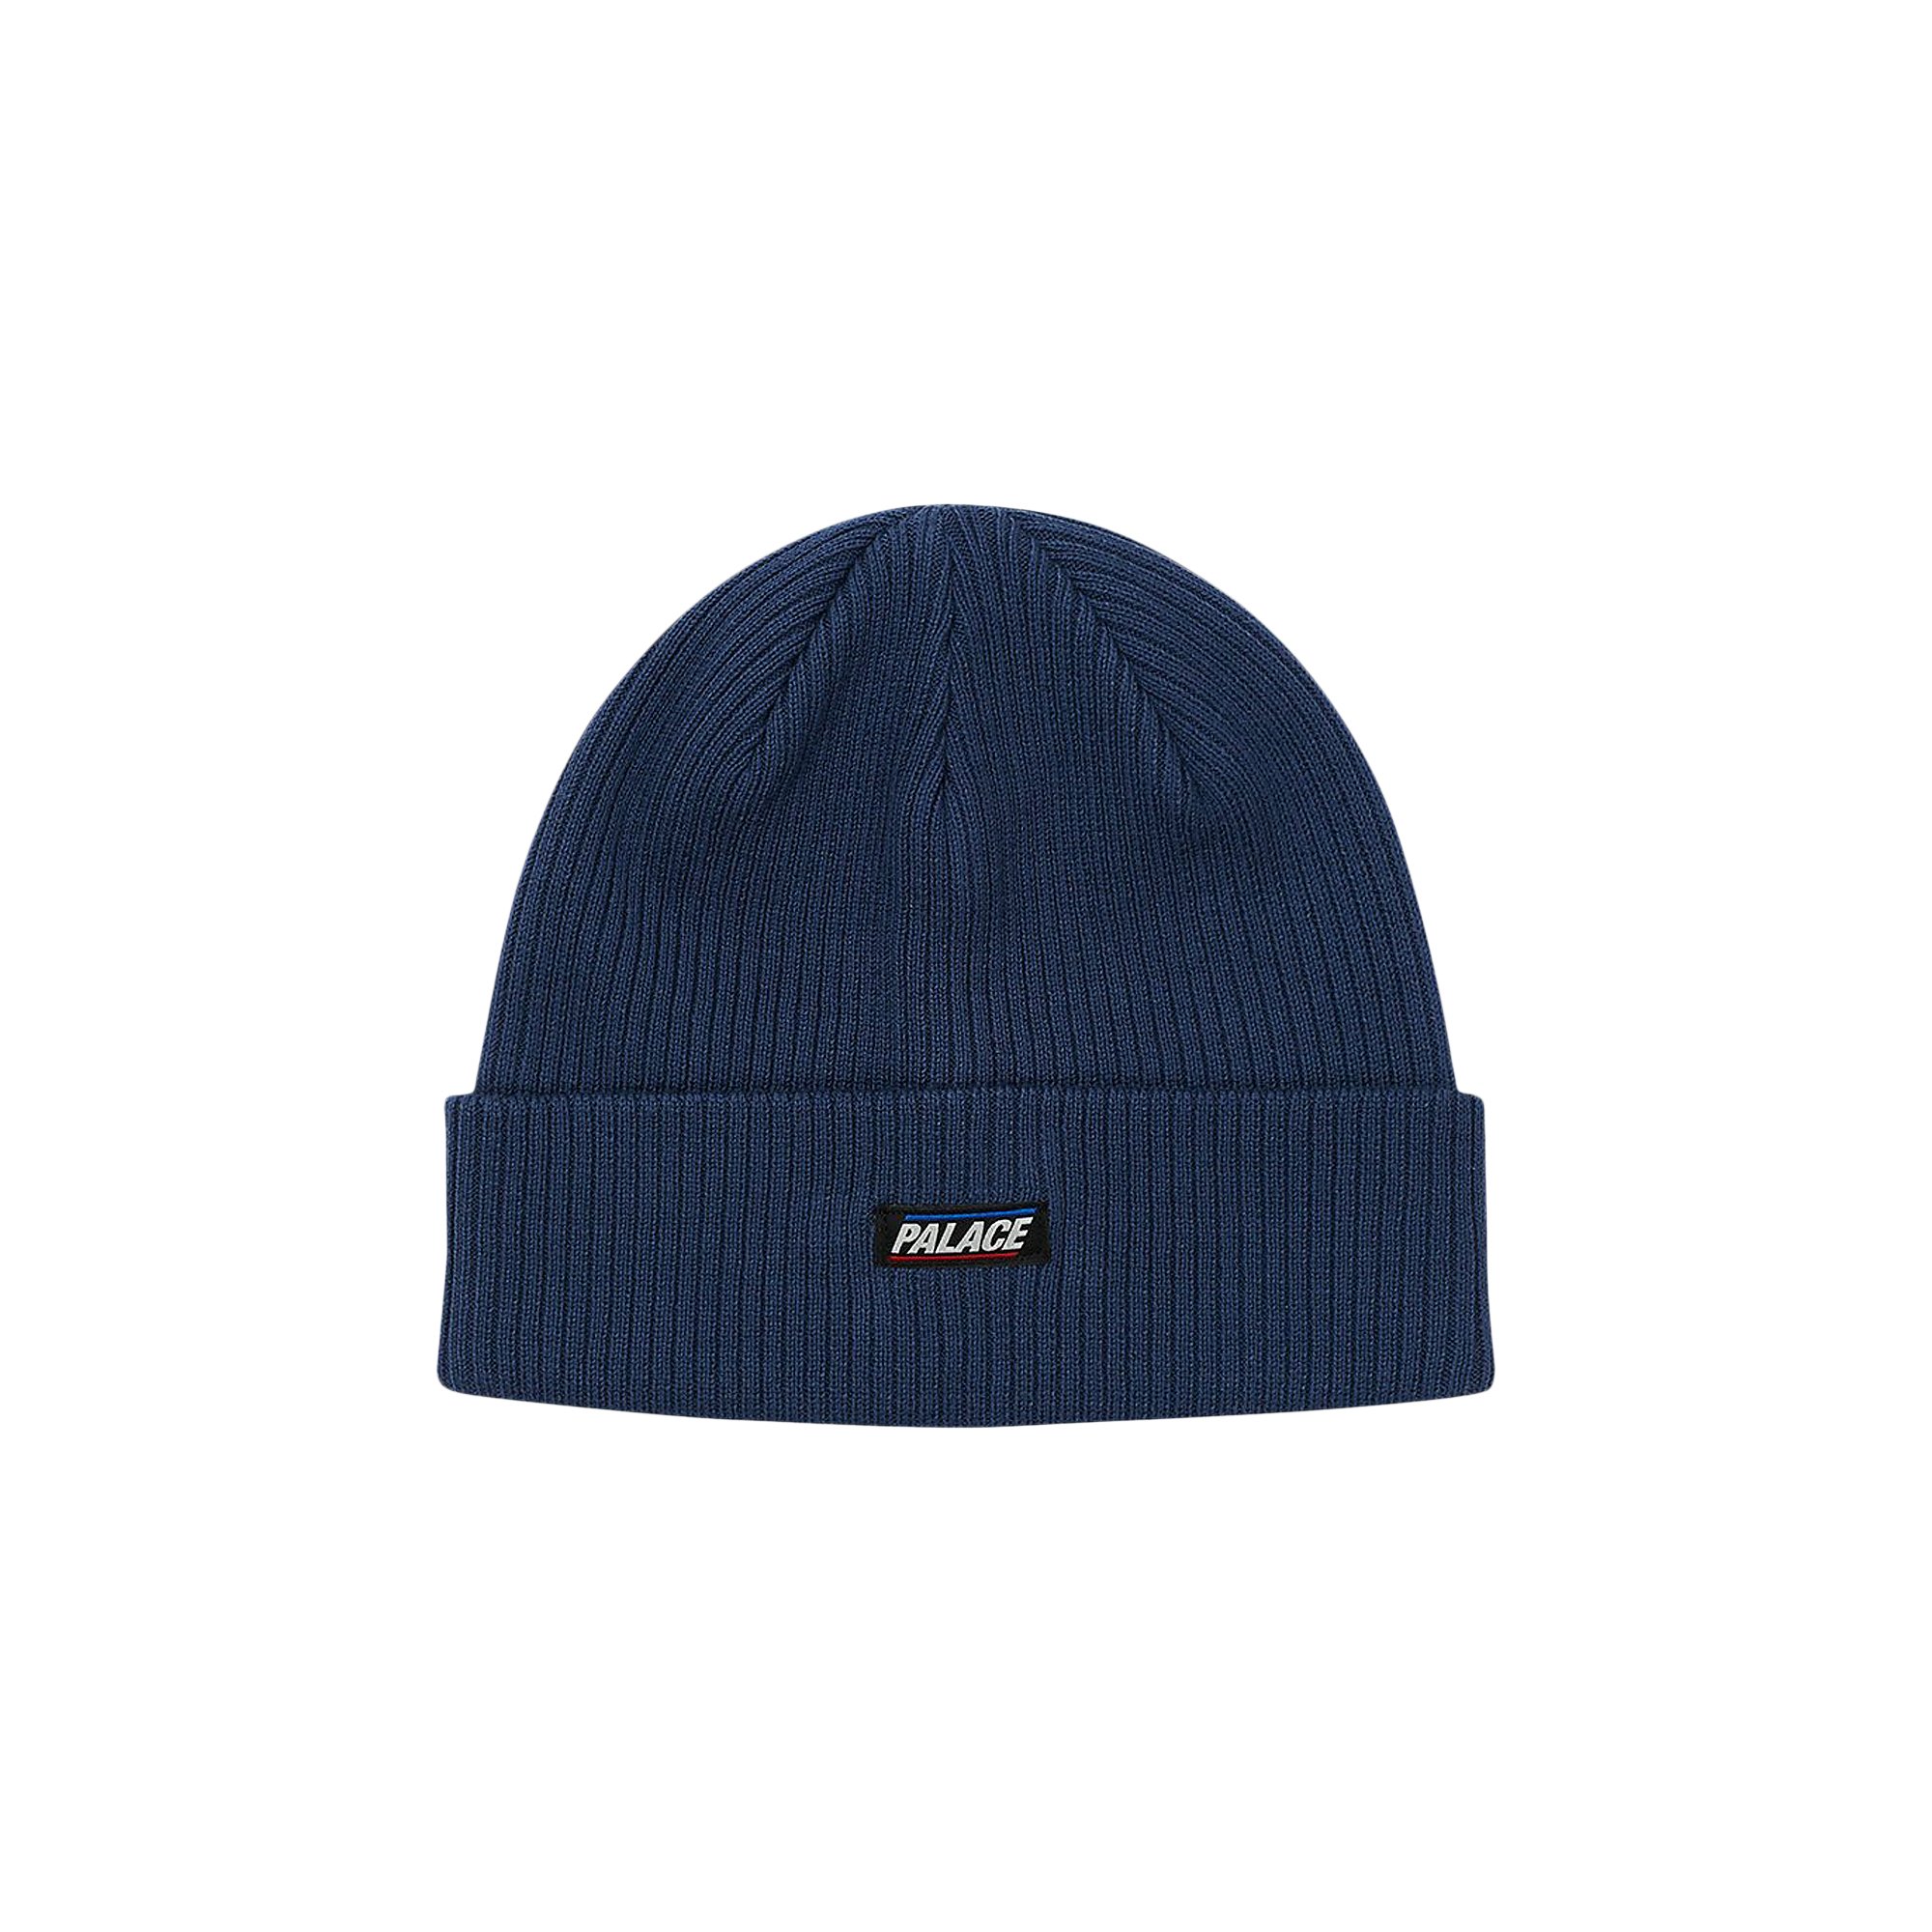 Buy Palace Basically A Beanie 'Washed Navy' - P19BN015 | GOAT